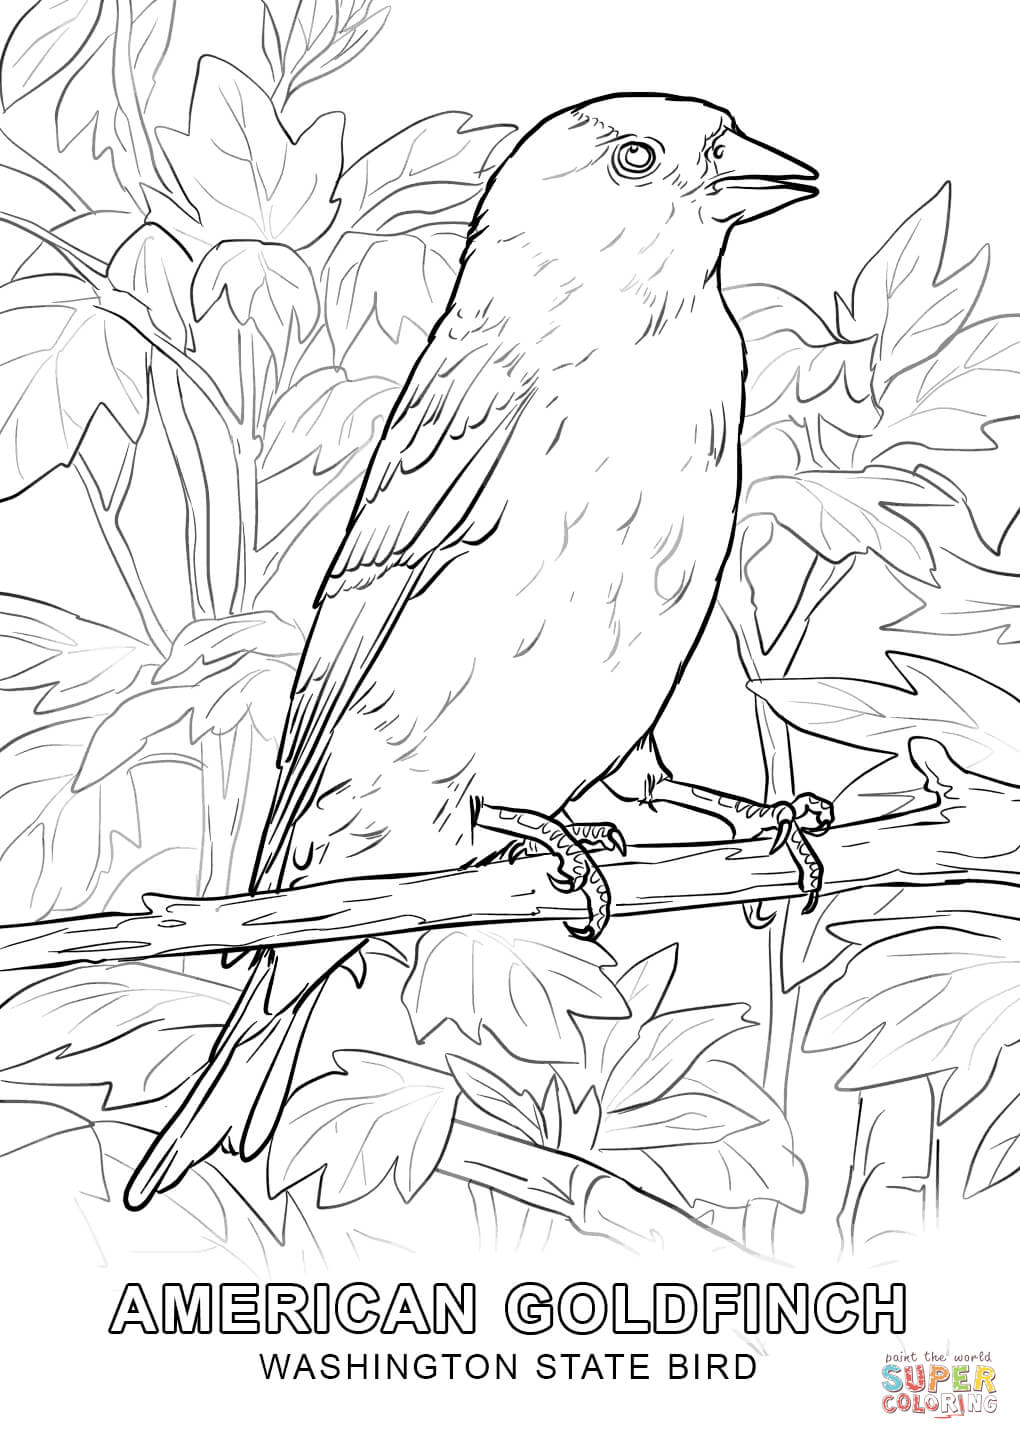 Washington State Bird coloring page | Free Printable Coloring Pages